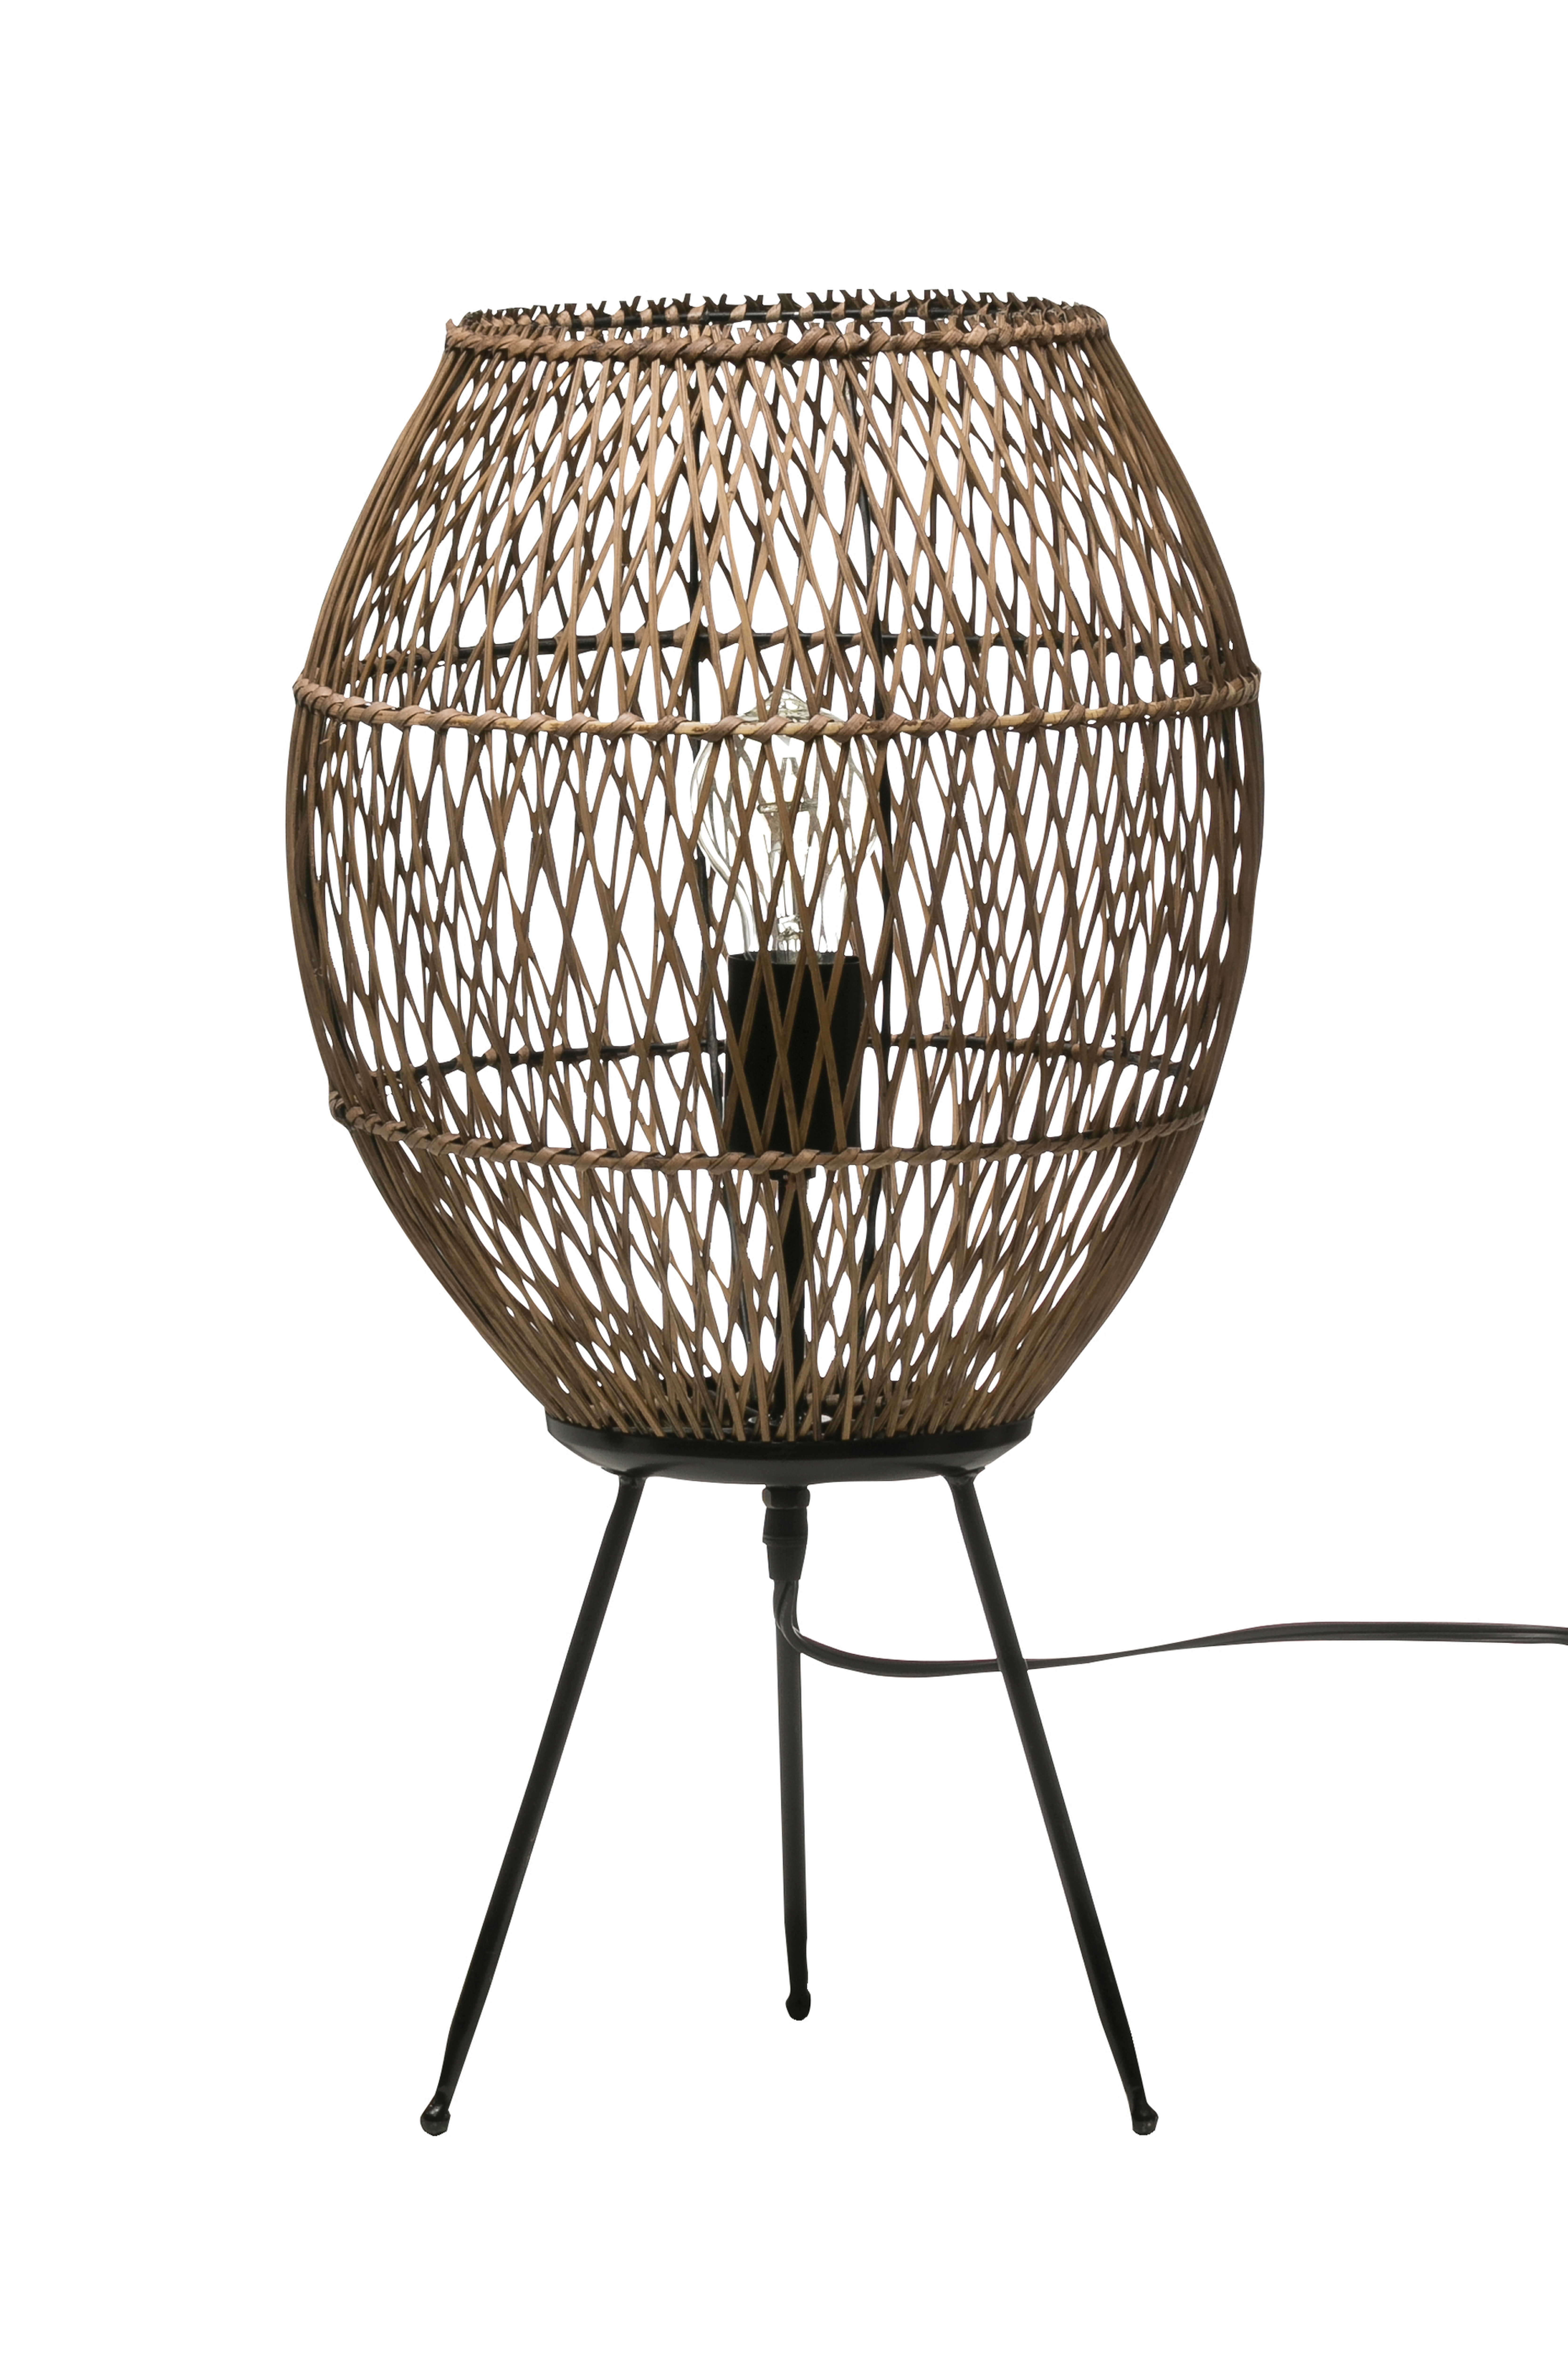 21.75"H Handwoven Bamboo & Rattan Table Lamp with Metal Tripod Legs & Inline Switch - Moss & Wilder